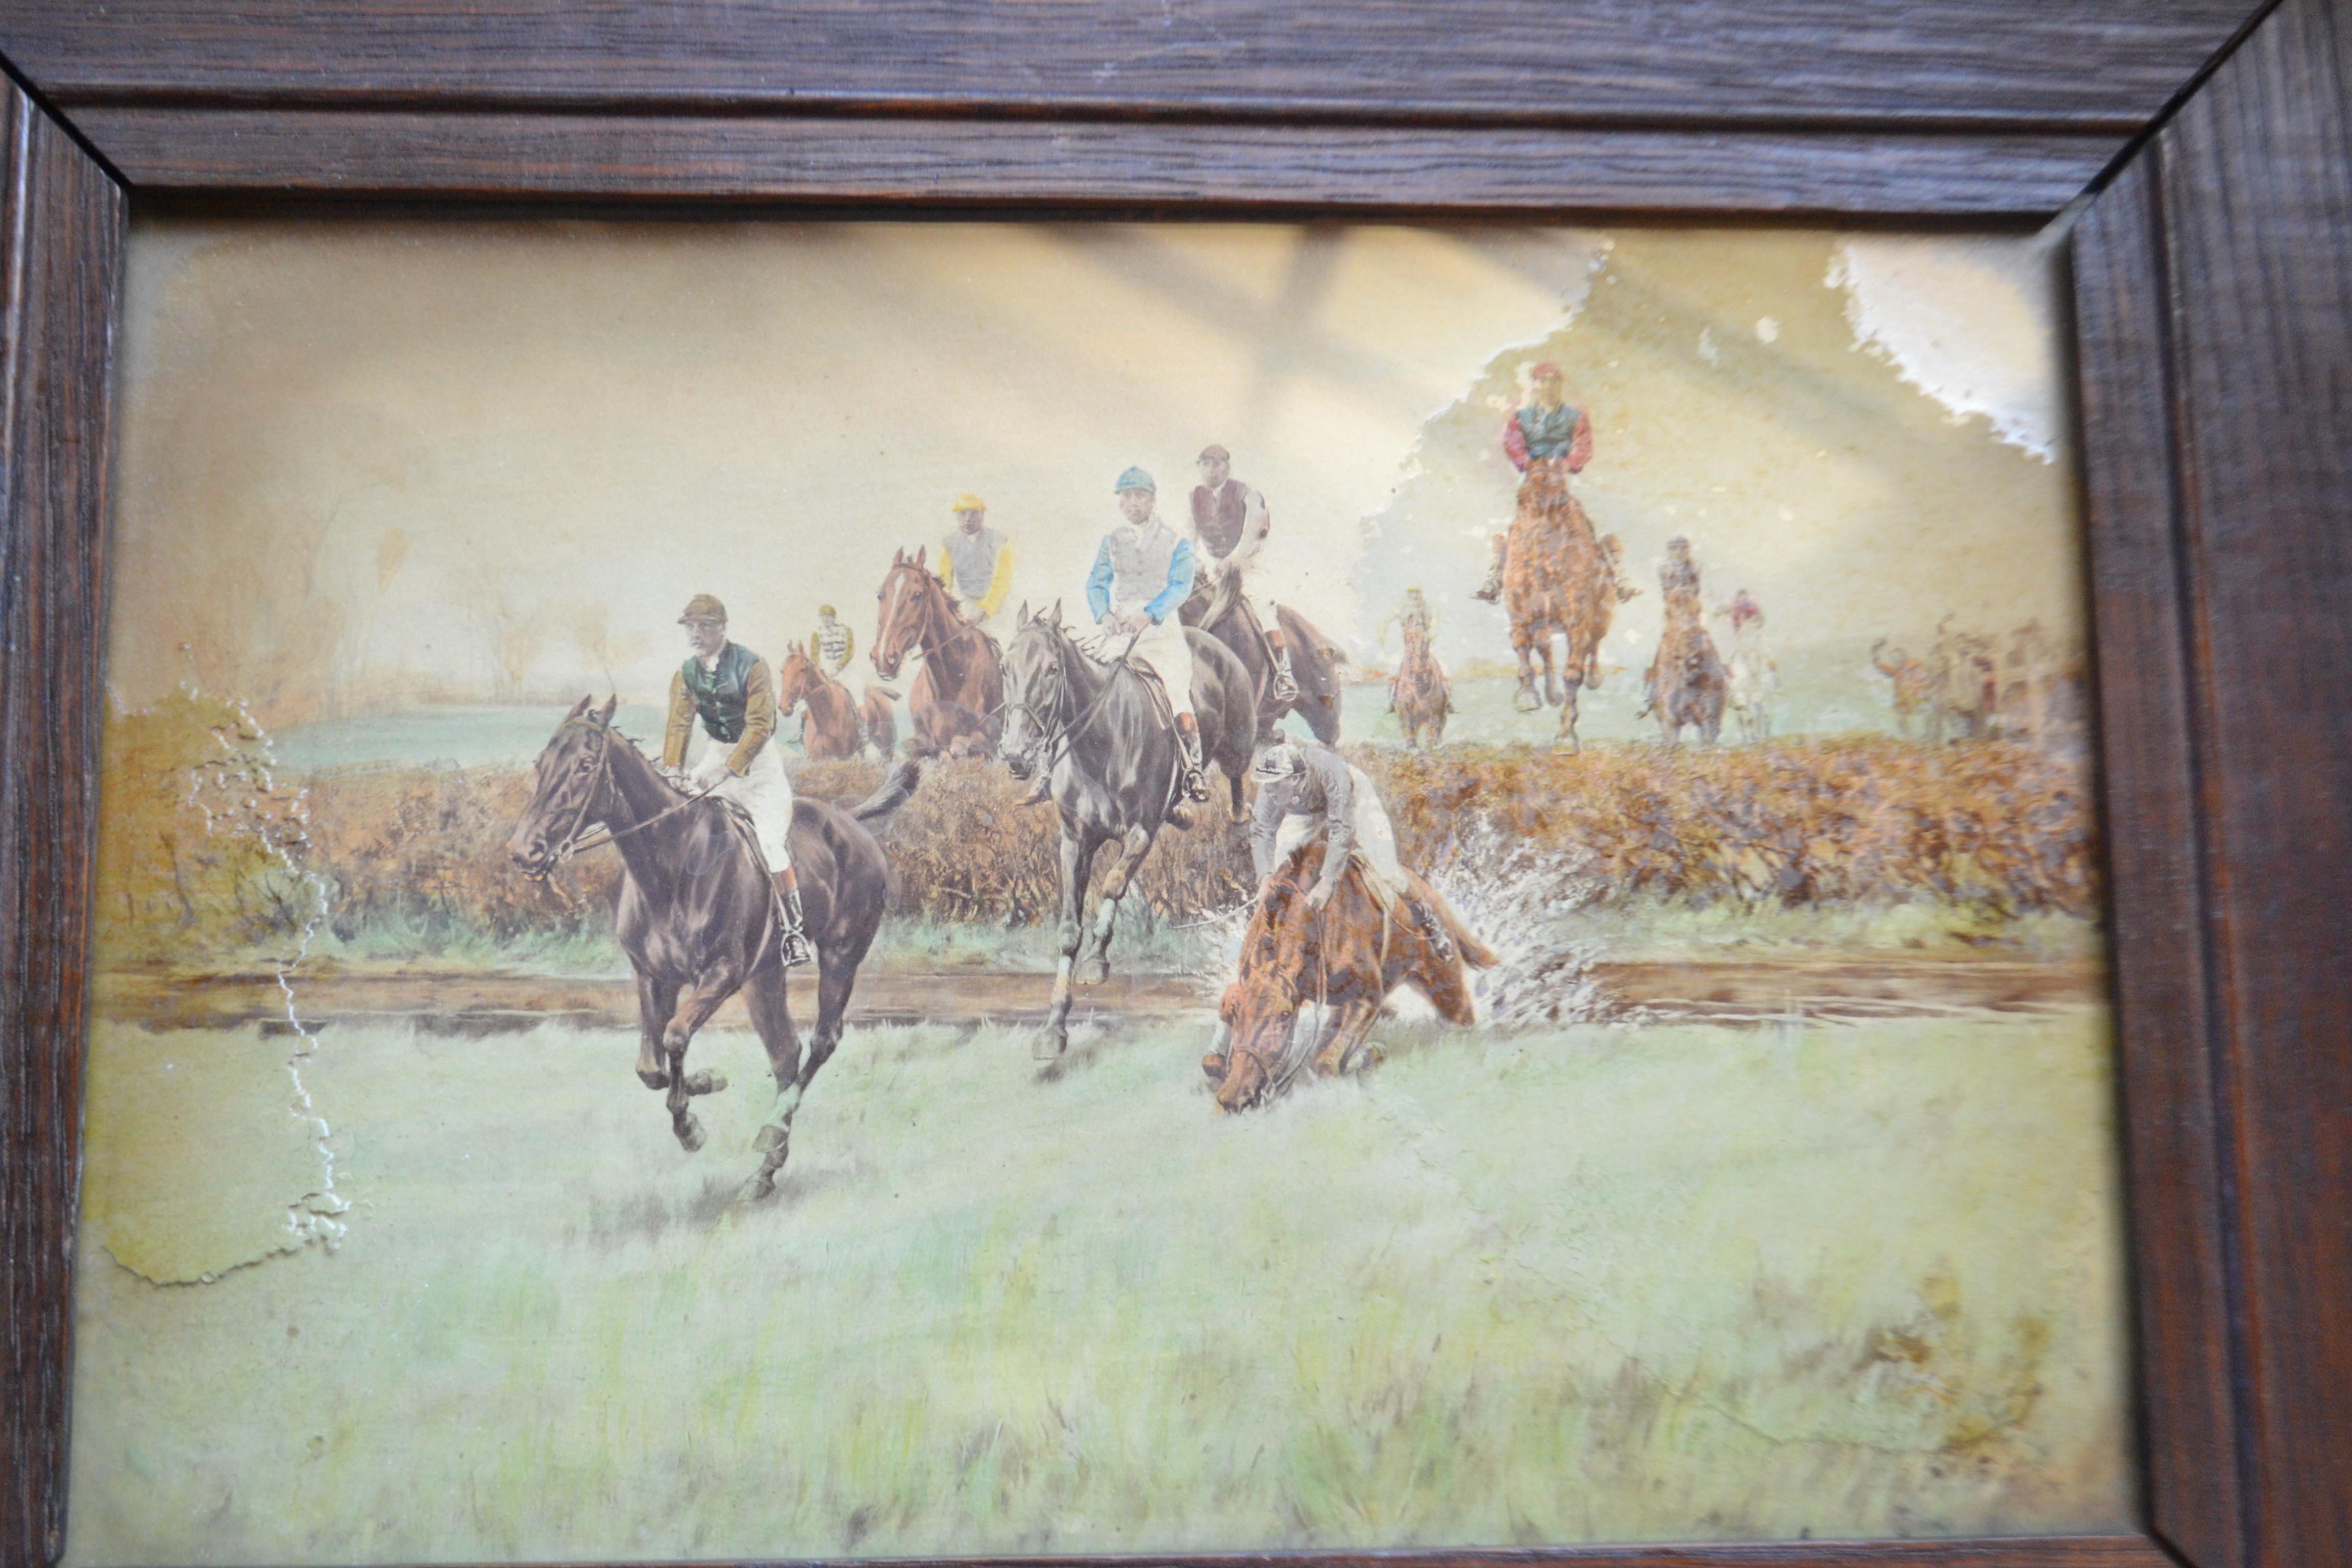 Set of Four Steeplechase Prints by Thomas Blinks In Fair Condition For Sale In Vista, CA